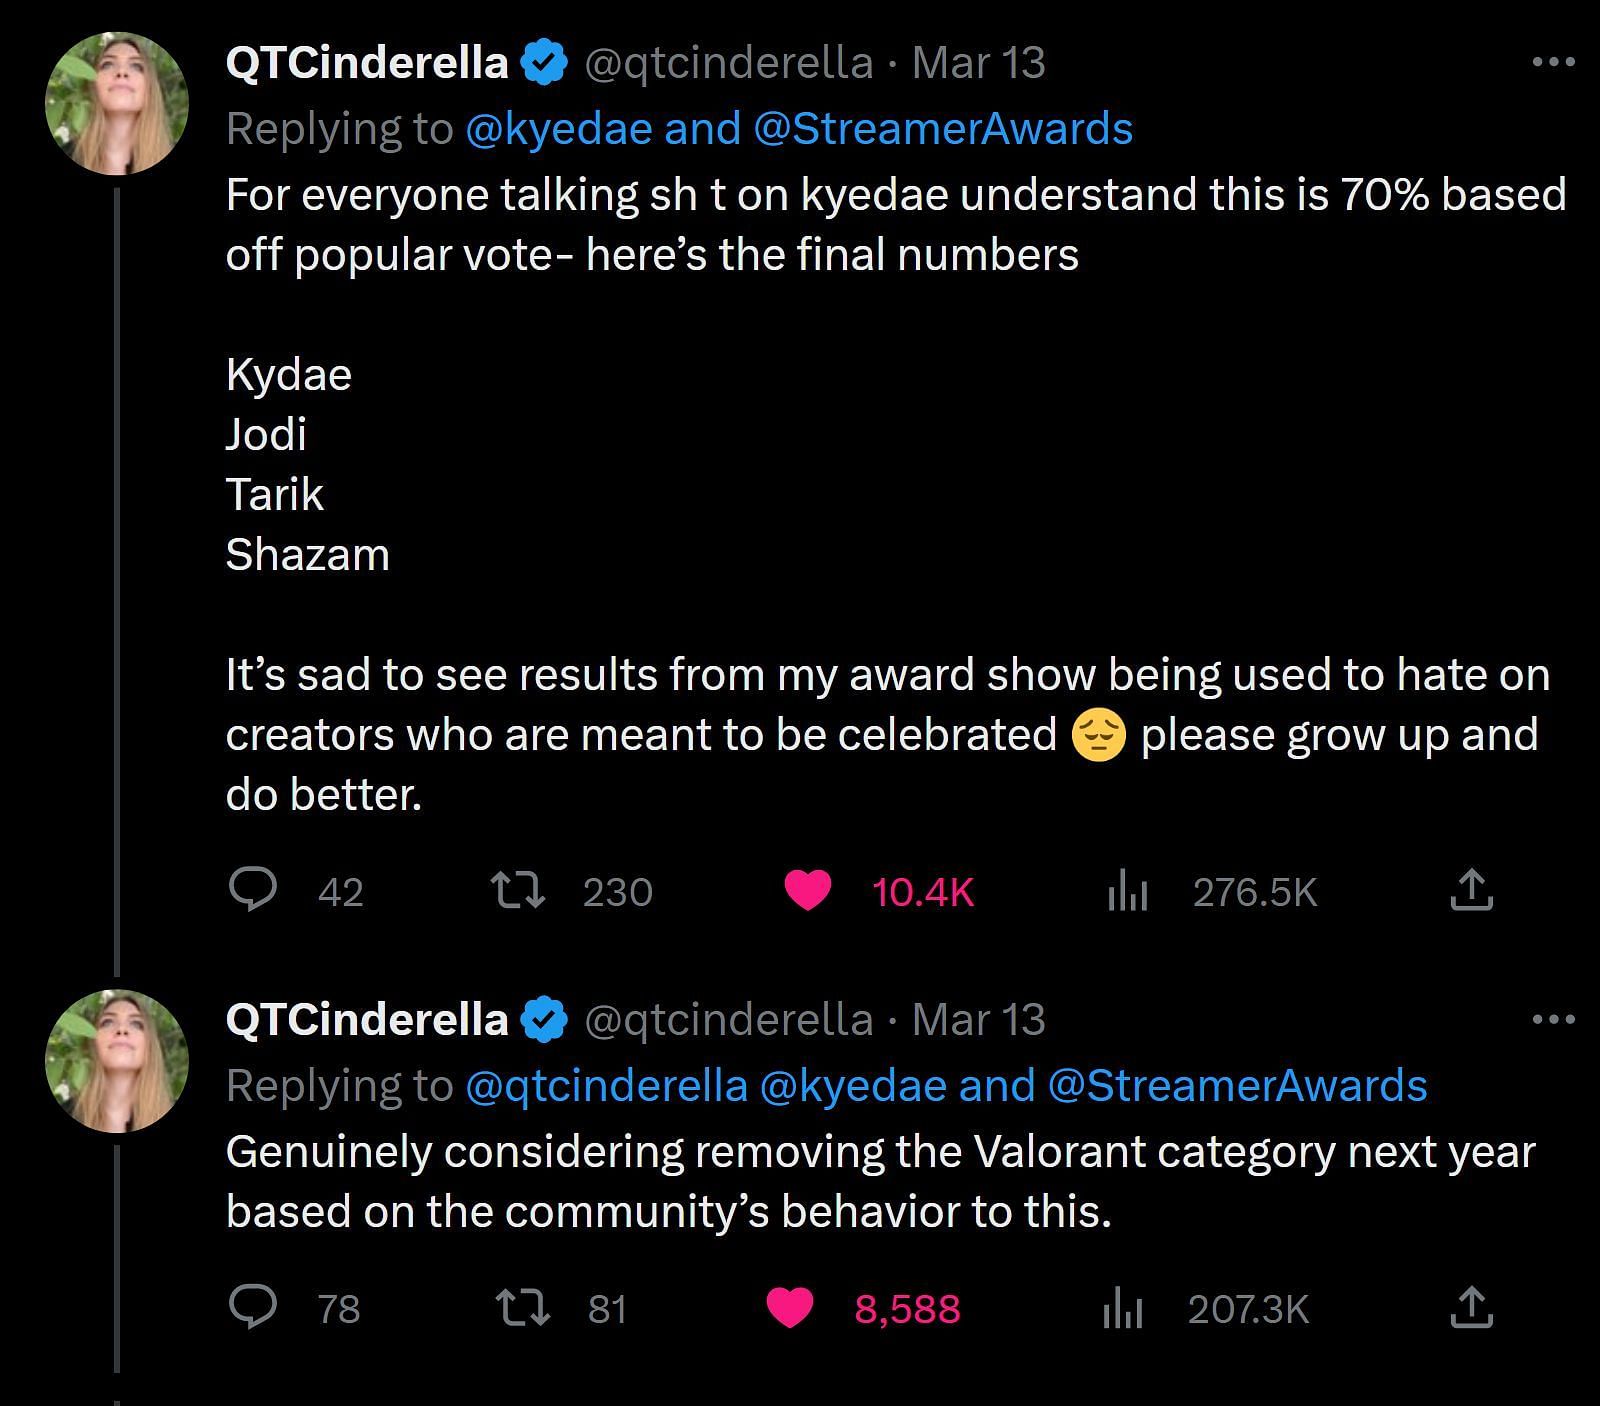 QTCinderella to take social media hiatus after negative comments about  Streamer Awards - Dot Esports